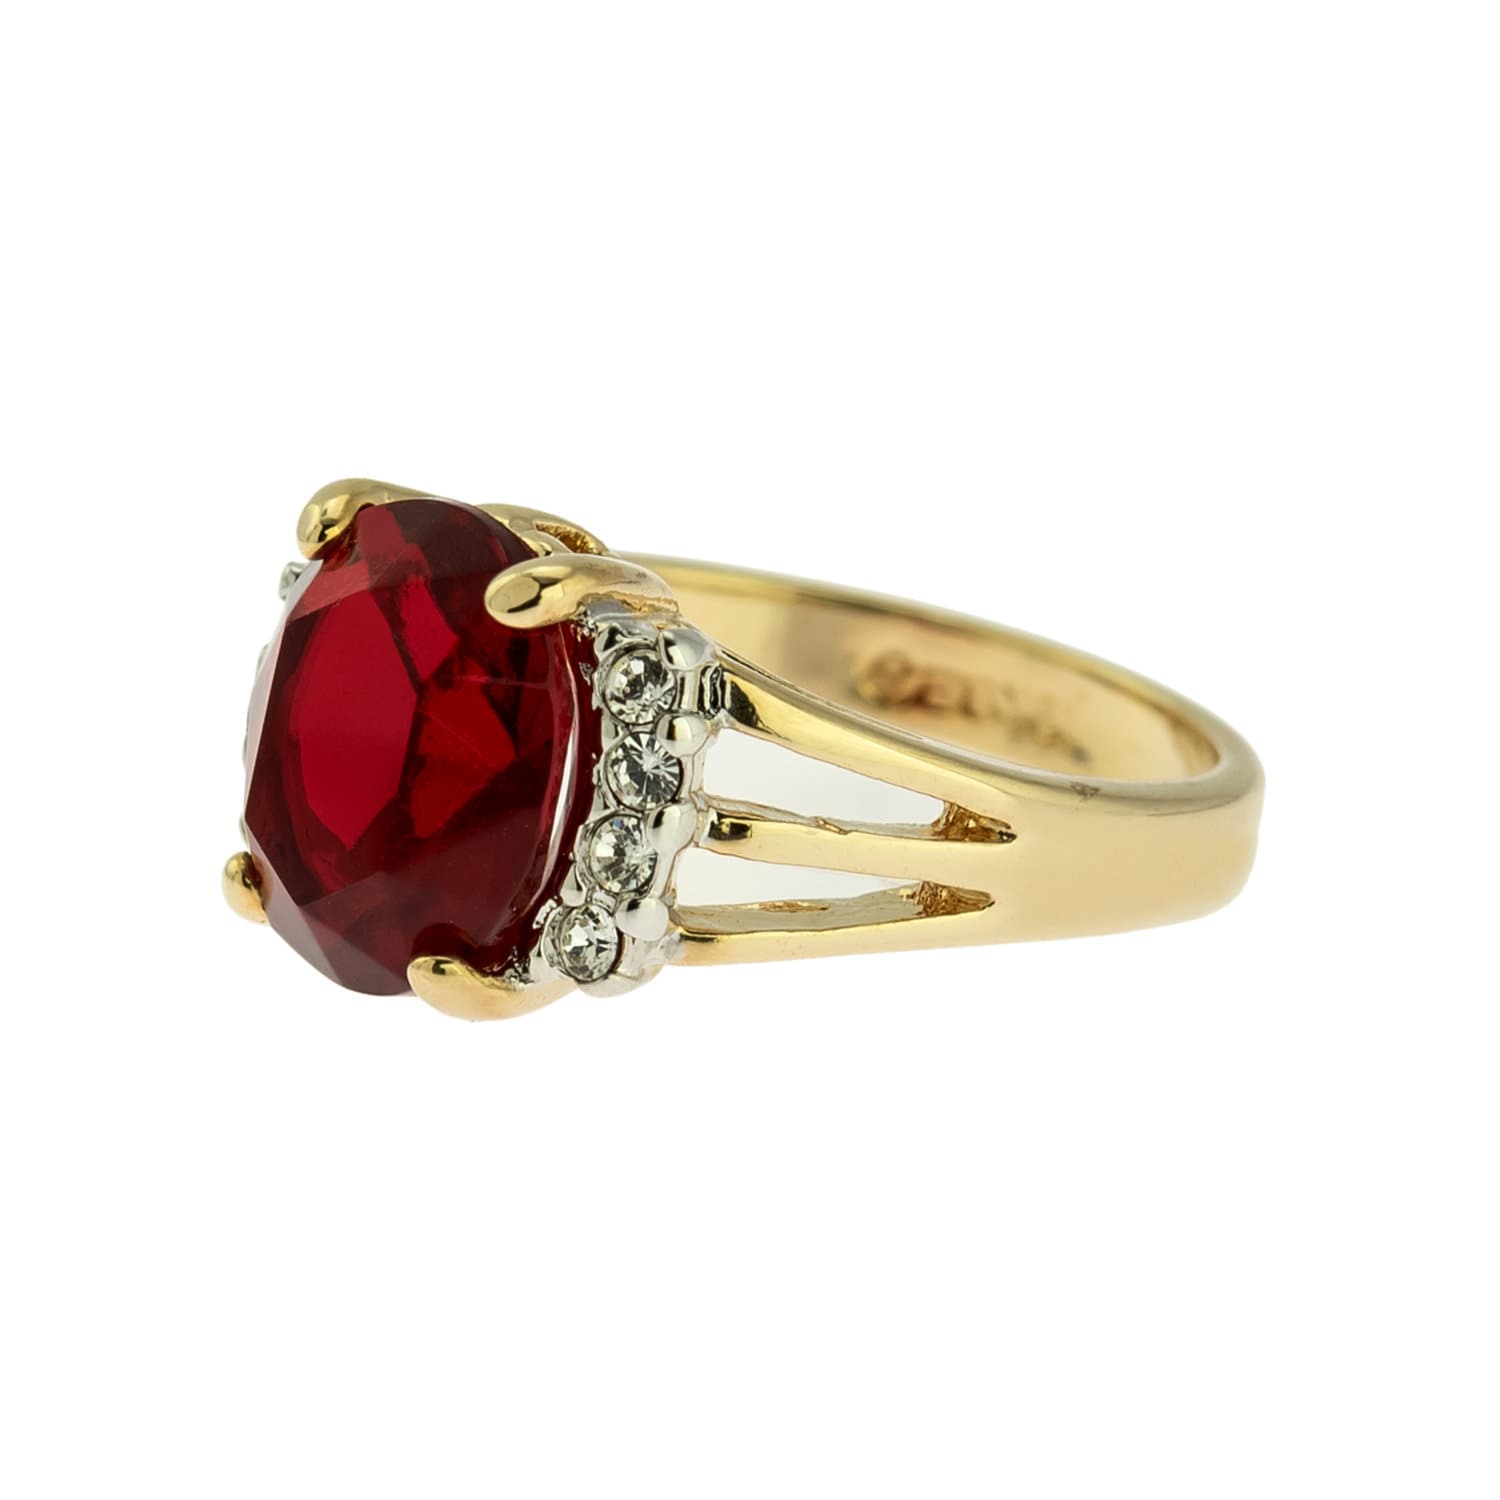 Vintage Ring 1980's Ruby Cubic Zirconia Ring with Clear Swarovski Crystals 18k Gold  R1664 - Limited Stock - Never Worn